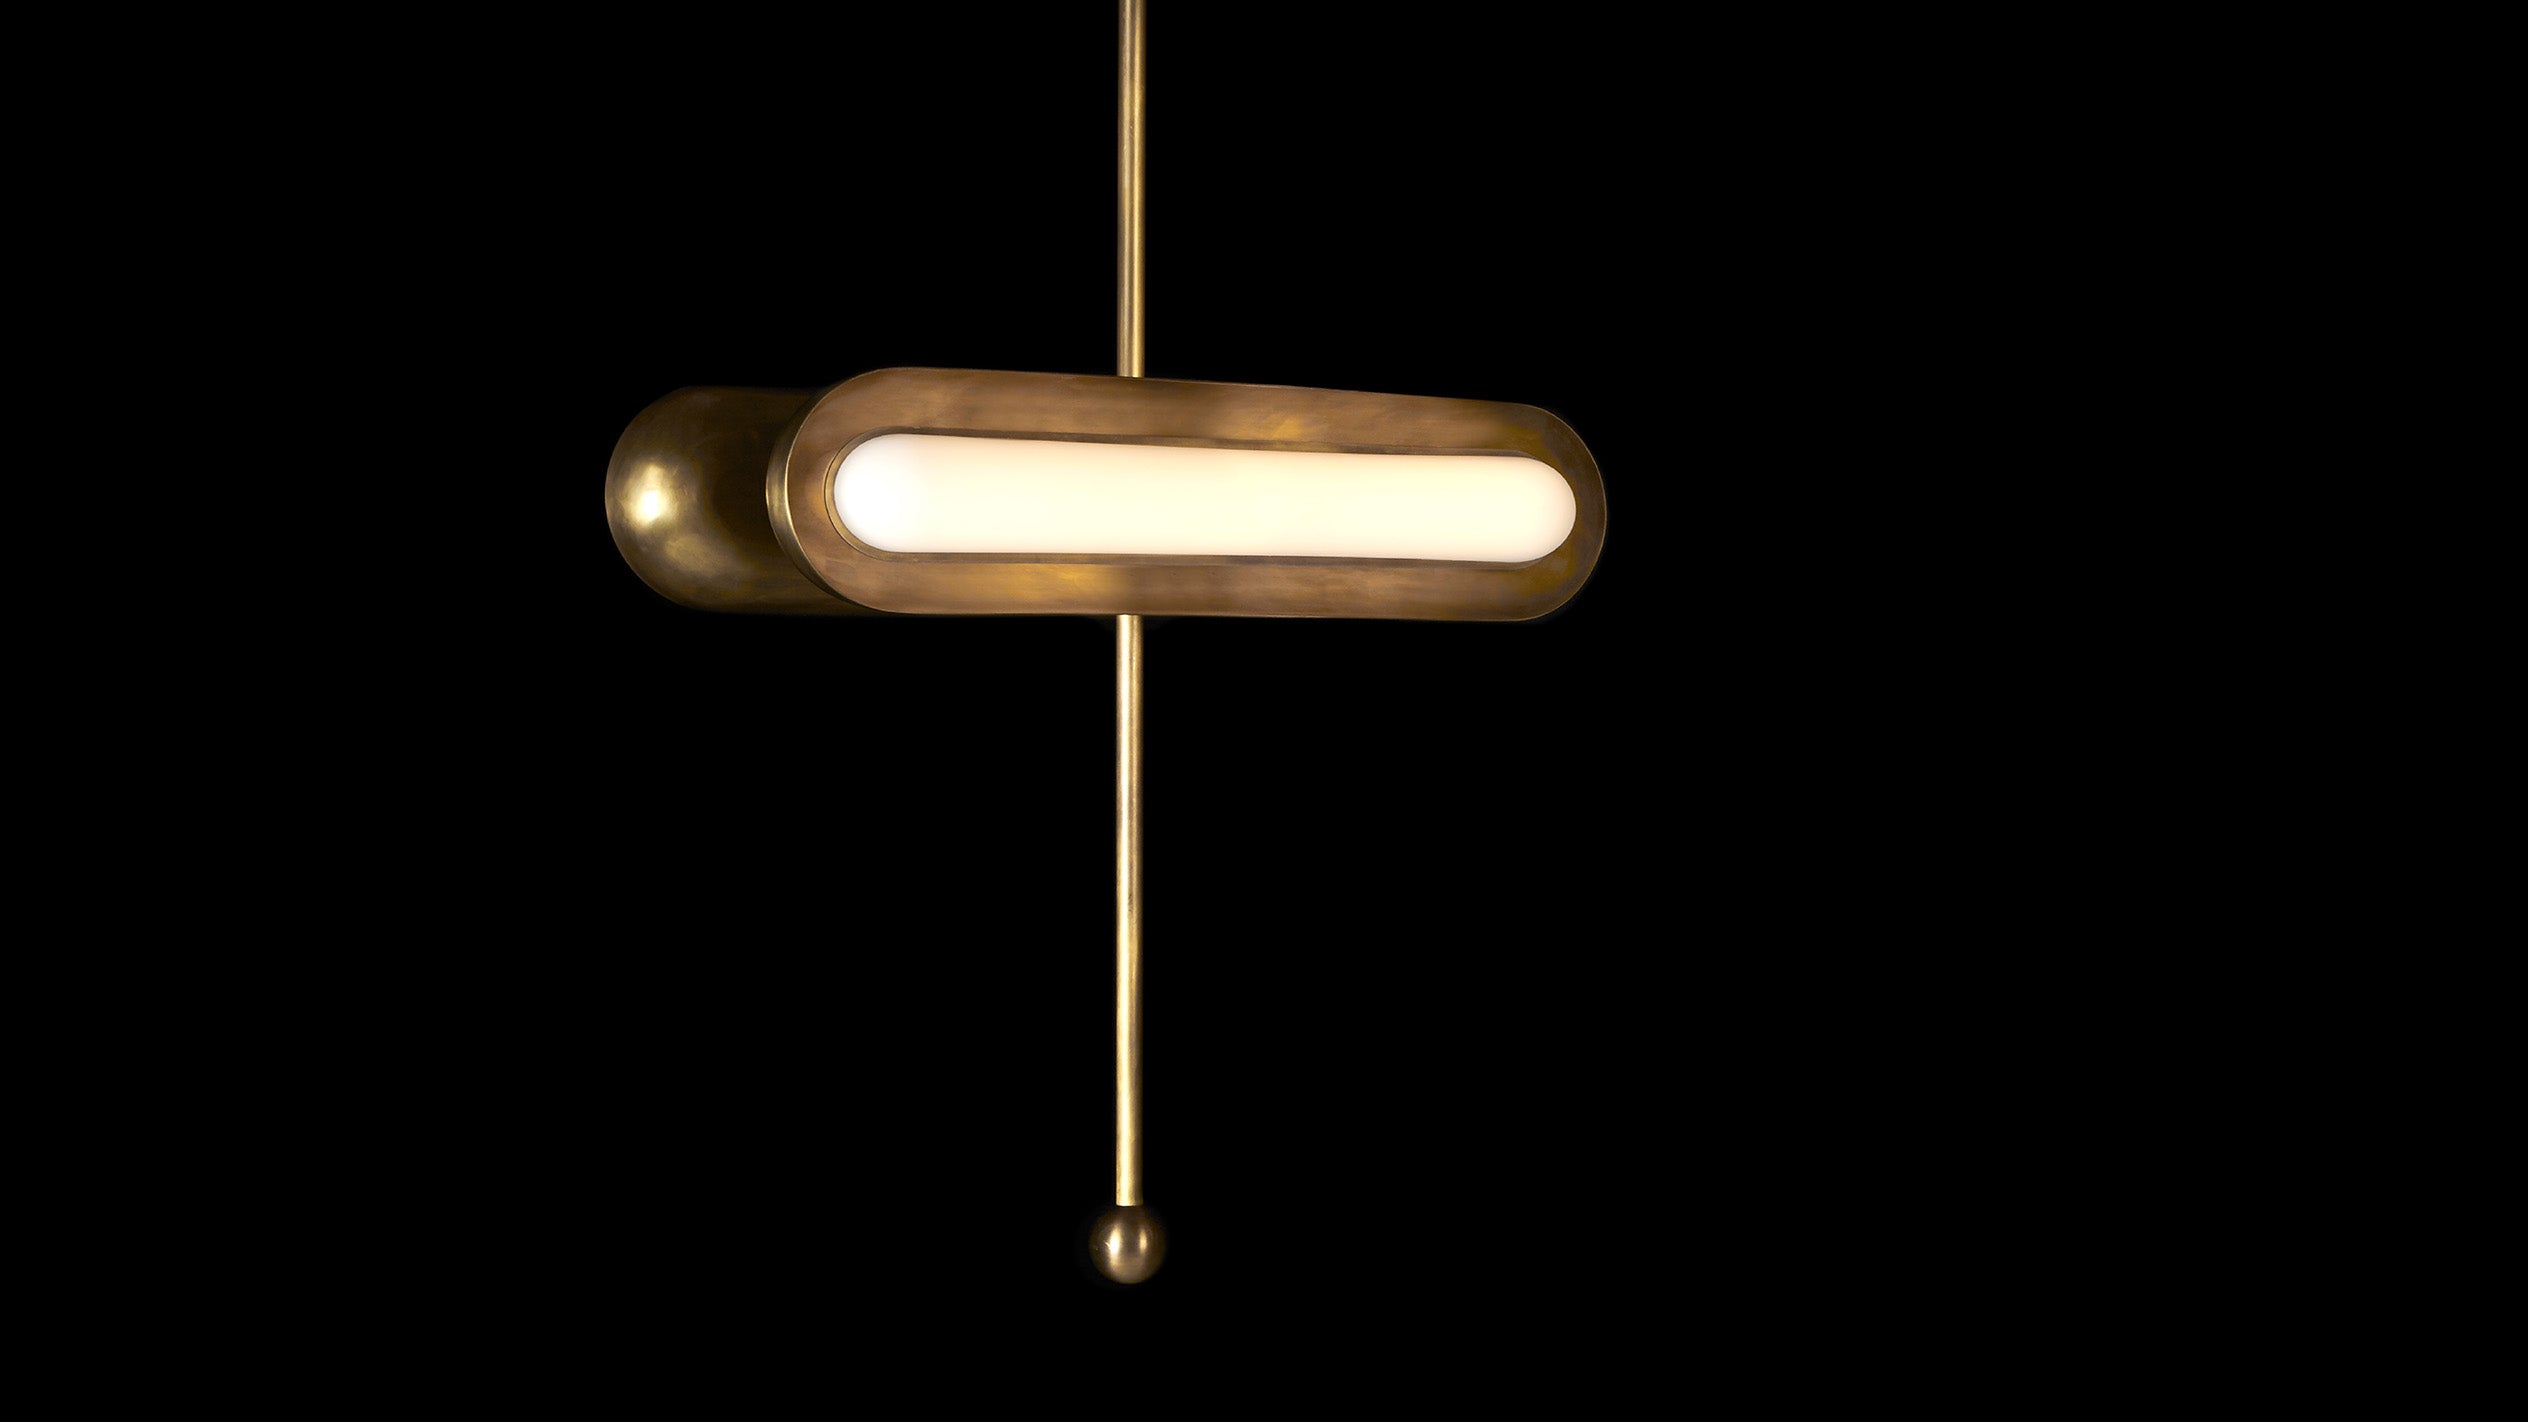 CIRCUIT : 2 horizontal ceiling pendant in Aged Brass finish, hanging against a black background. 